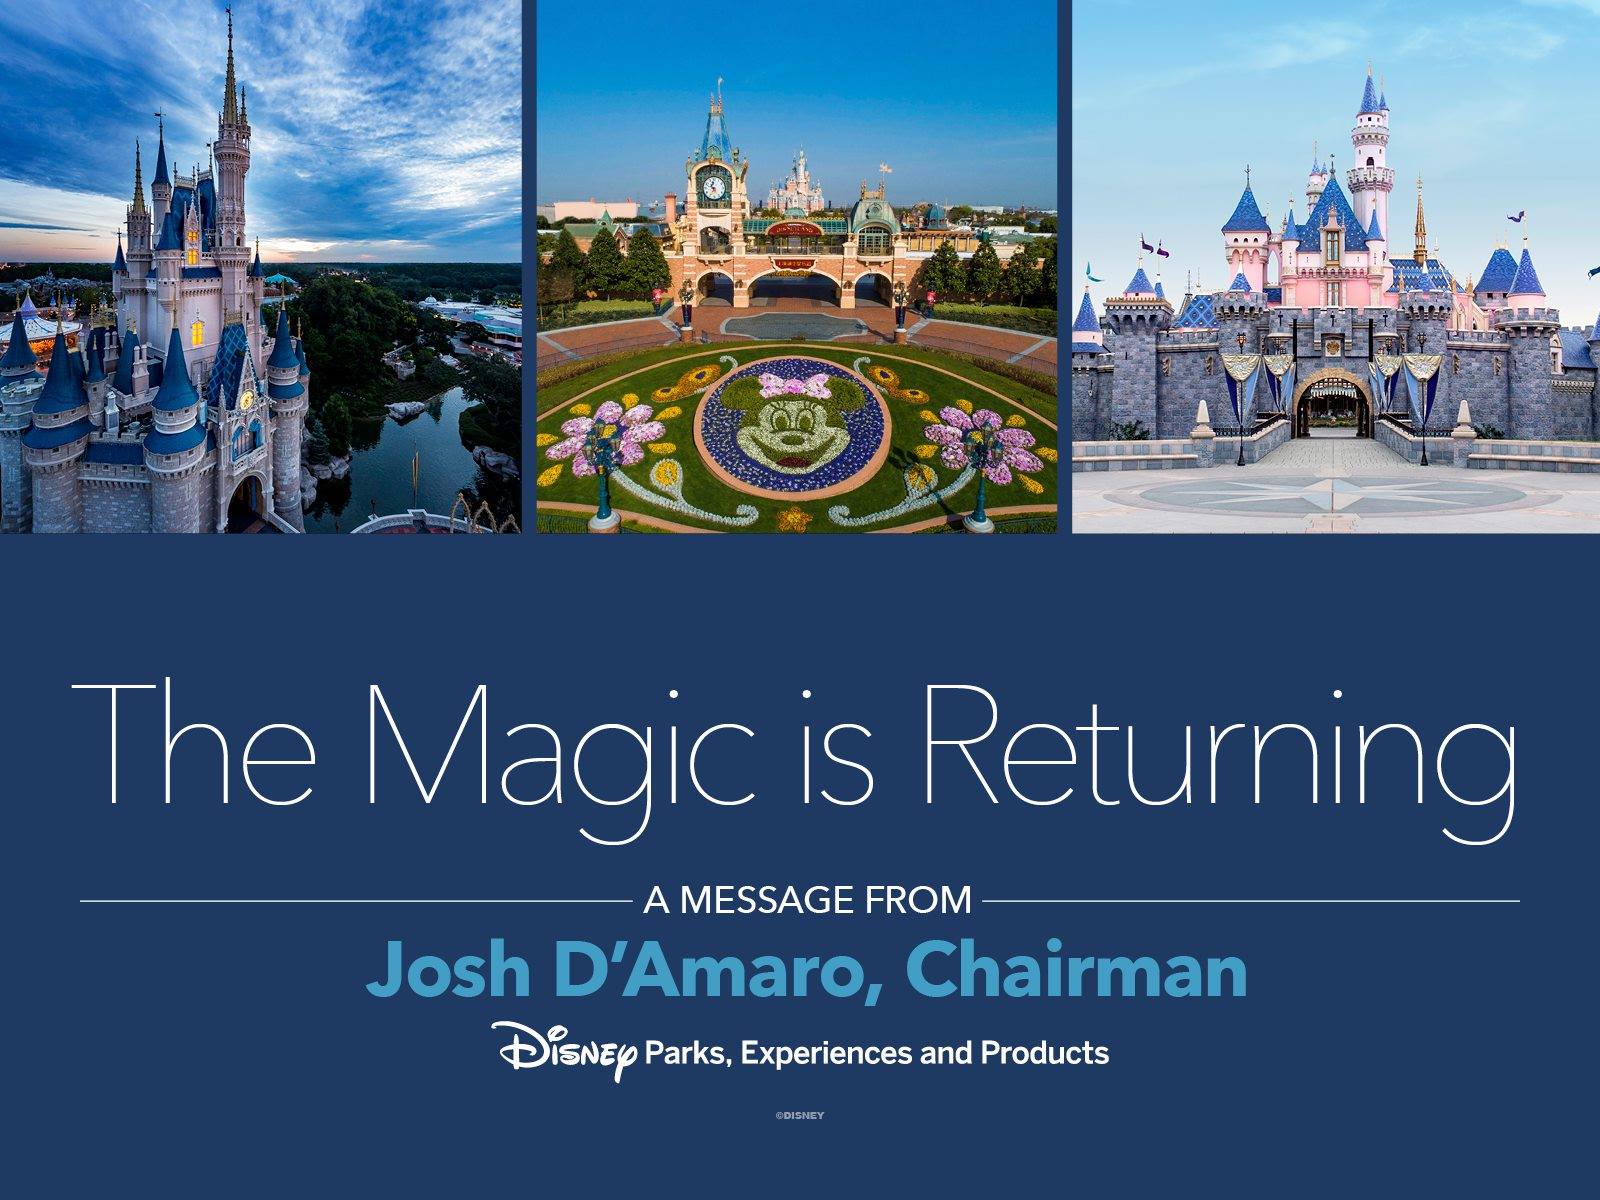 Chairman of Disney Parks Experiences and Products Josh D’Amaro issues a statement on reopening of Disneyland